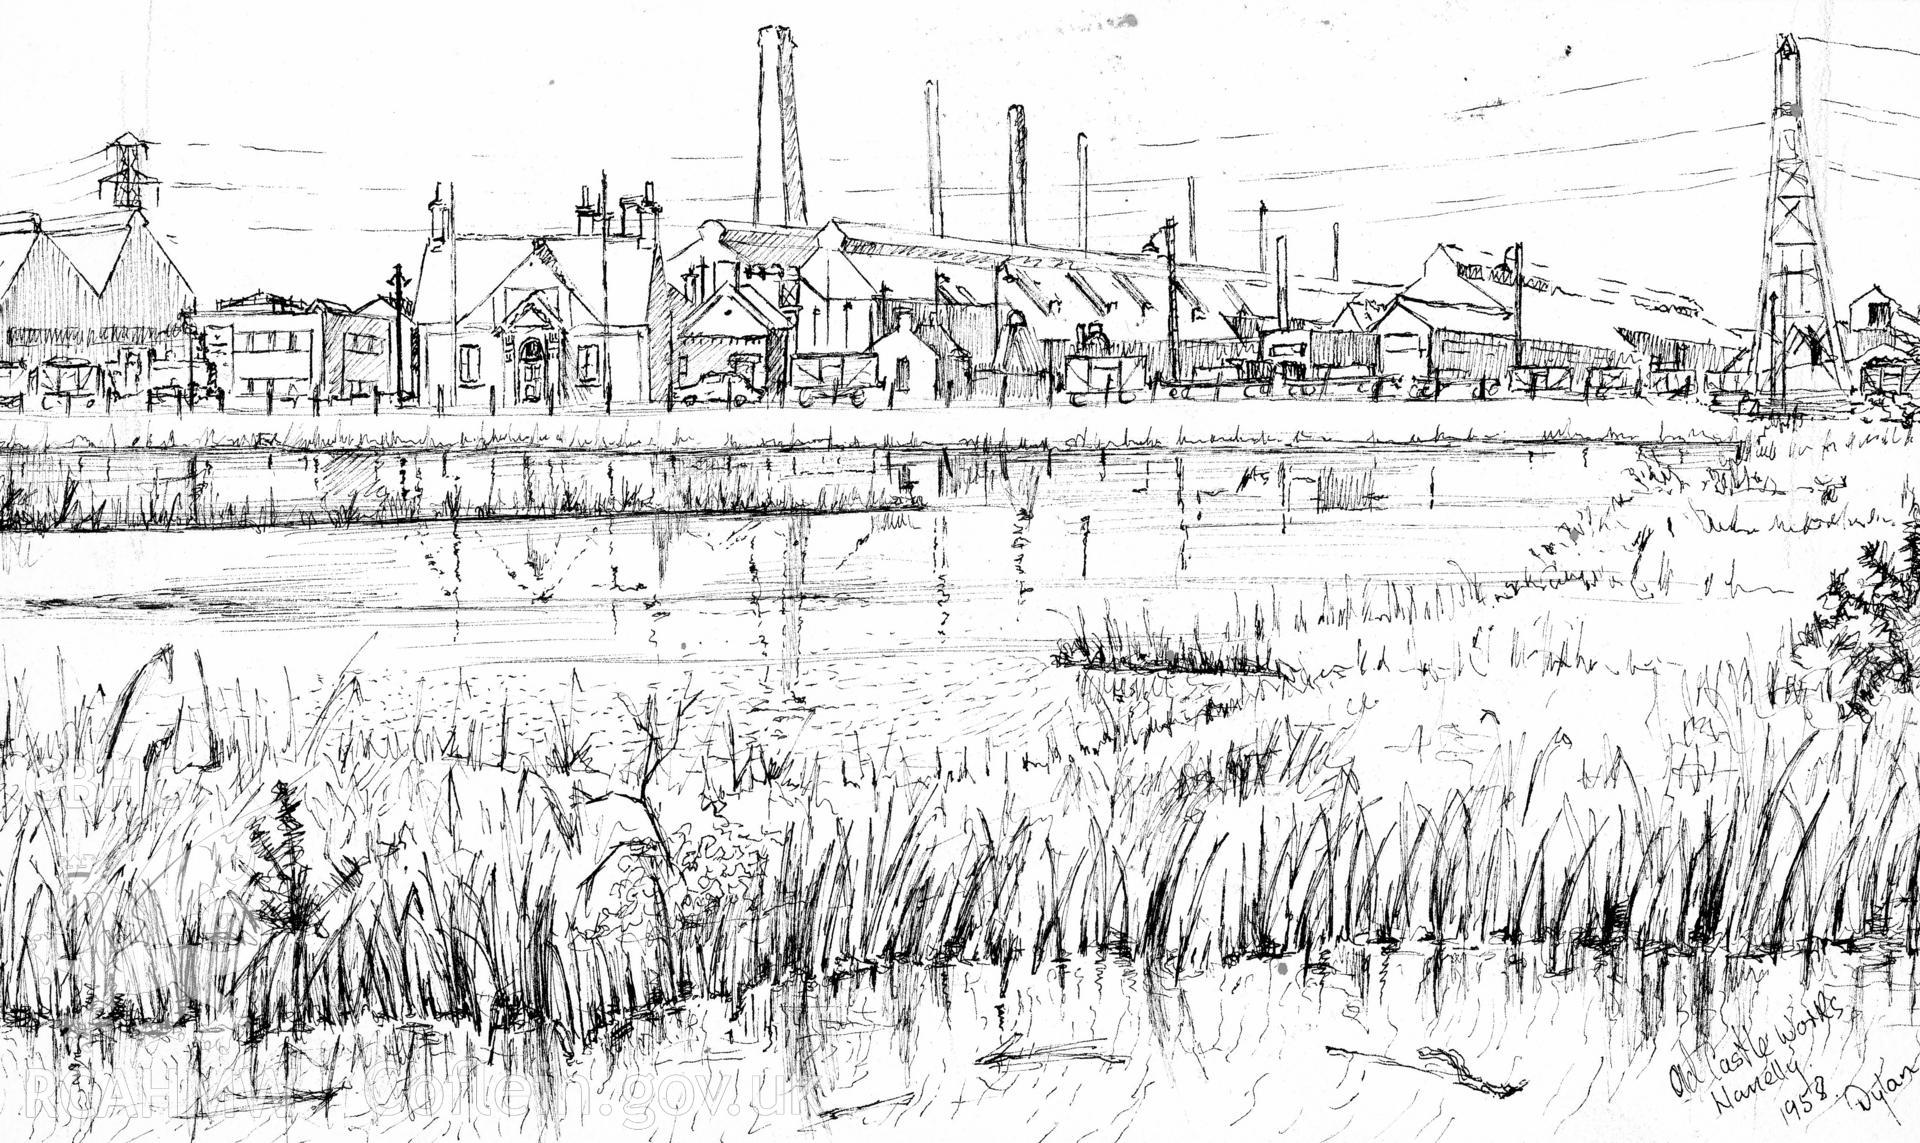 Pen and ink sketch by Dylan Roberts, showing  landscape view of Old Castle Works, Llanelli.